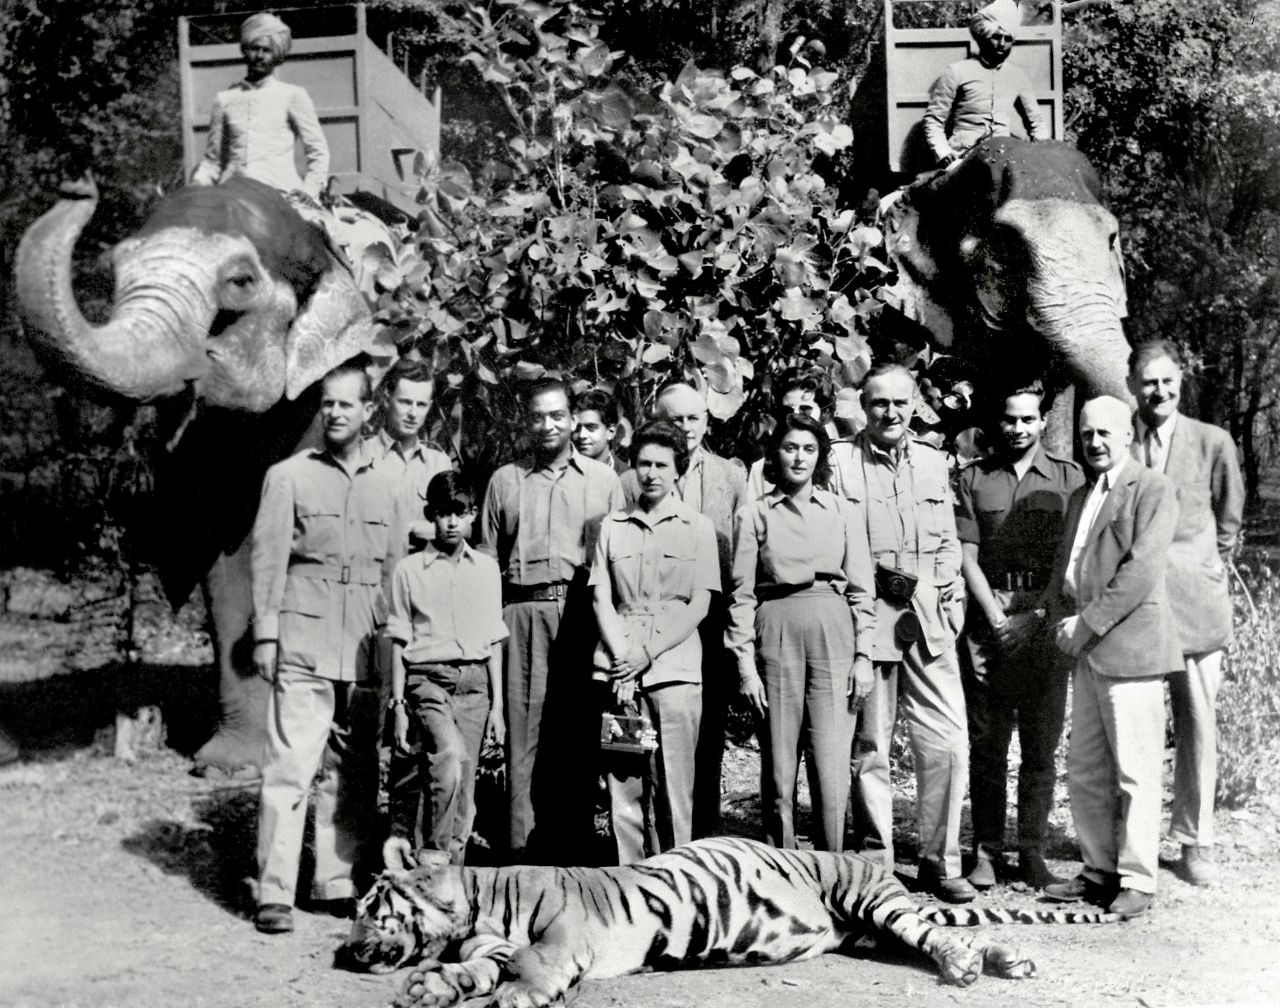 The Queen, center, and Prince Philip, left, pose with a tiger Philip killed on a hunting trip during an official visit to India in 1961. They are seen with the Maharaja and the Maharani of Jaipur.